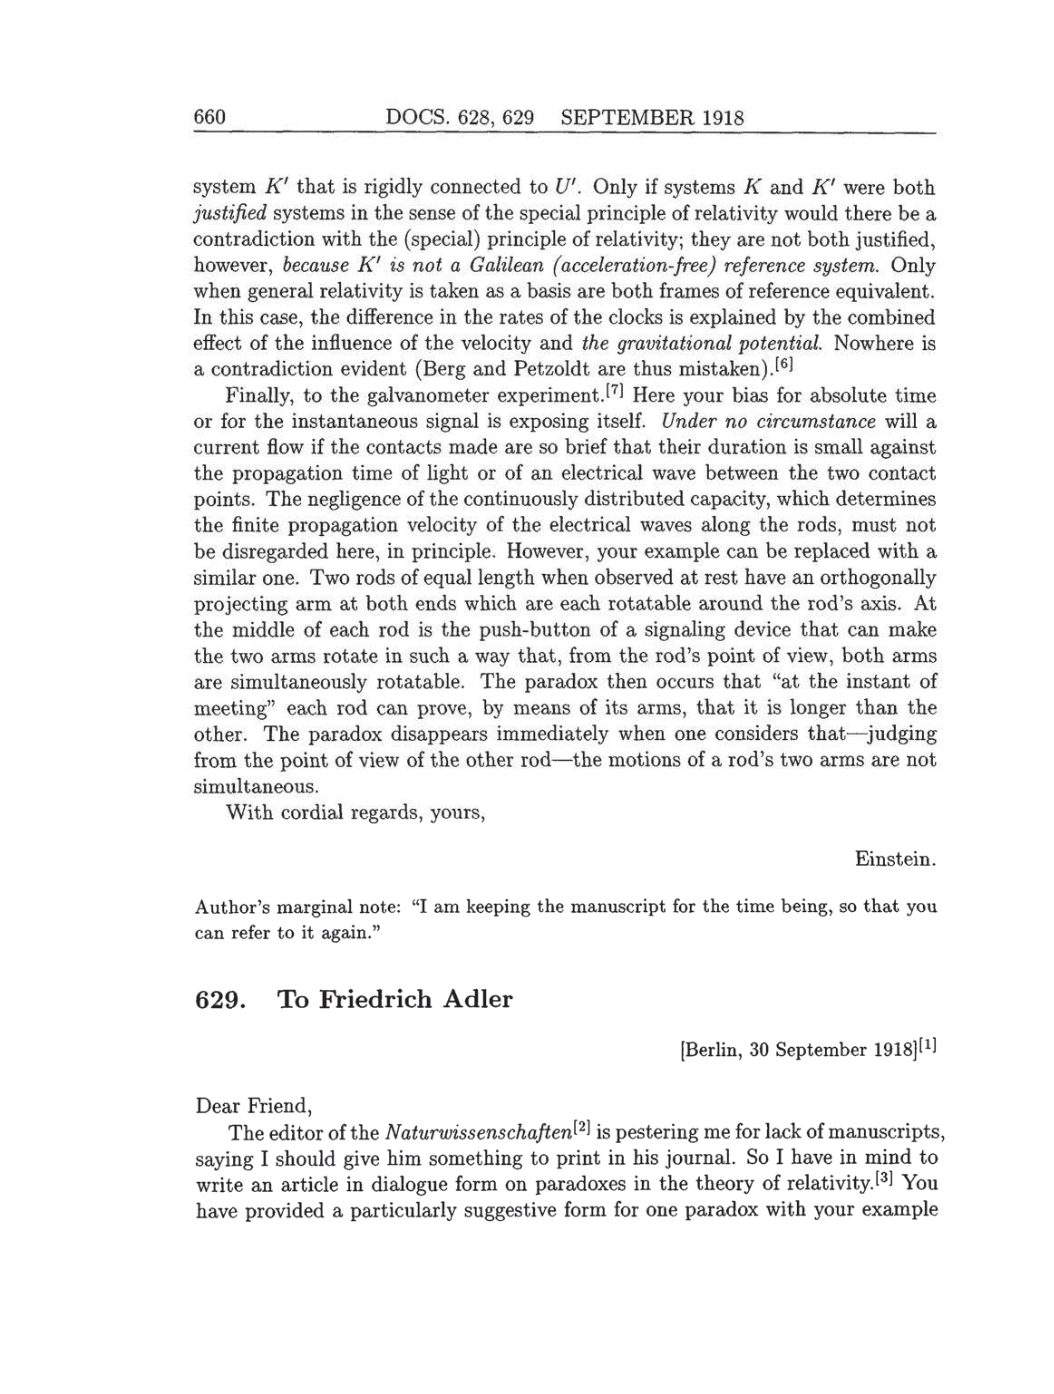 Volume 8: The Berlin Years: Correspondence, 1914-1918 (English translation supplement) page 660